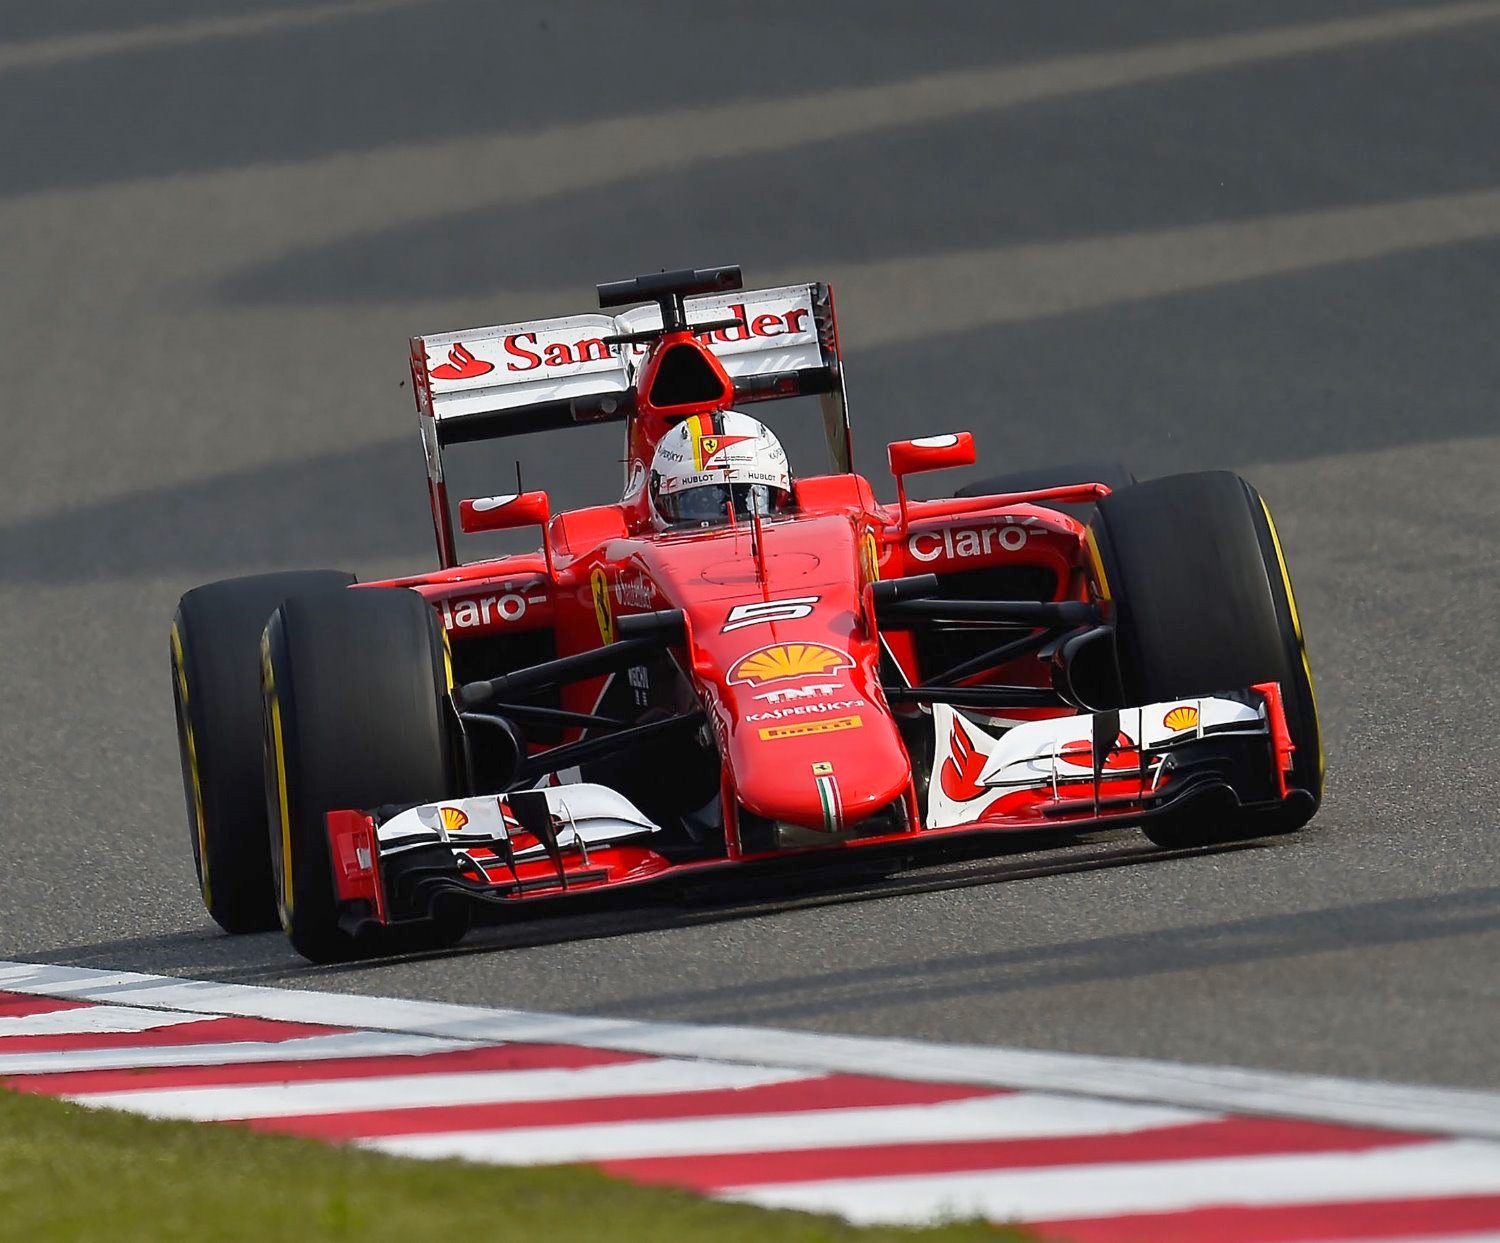 Vettel could not keep up with the Mercedes